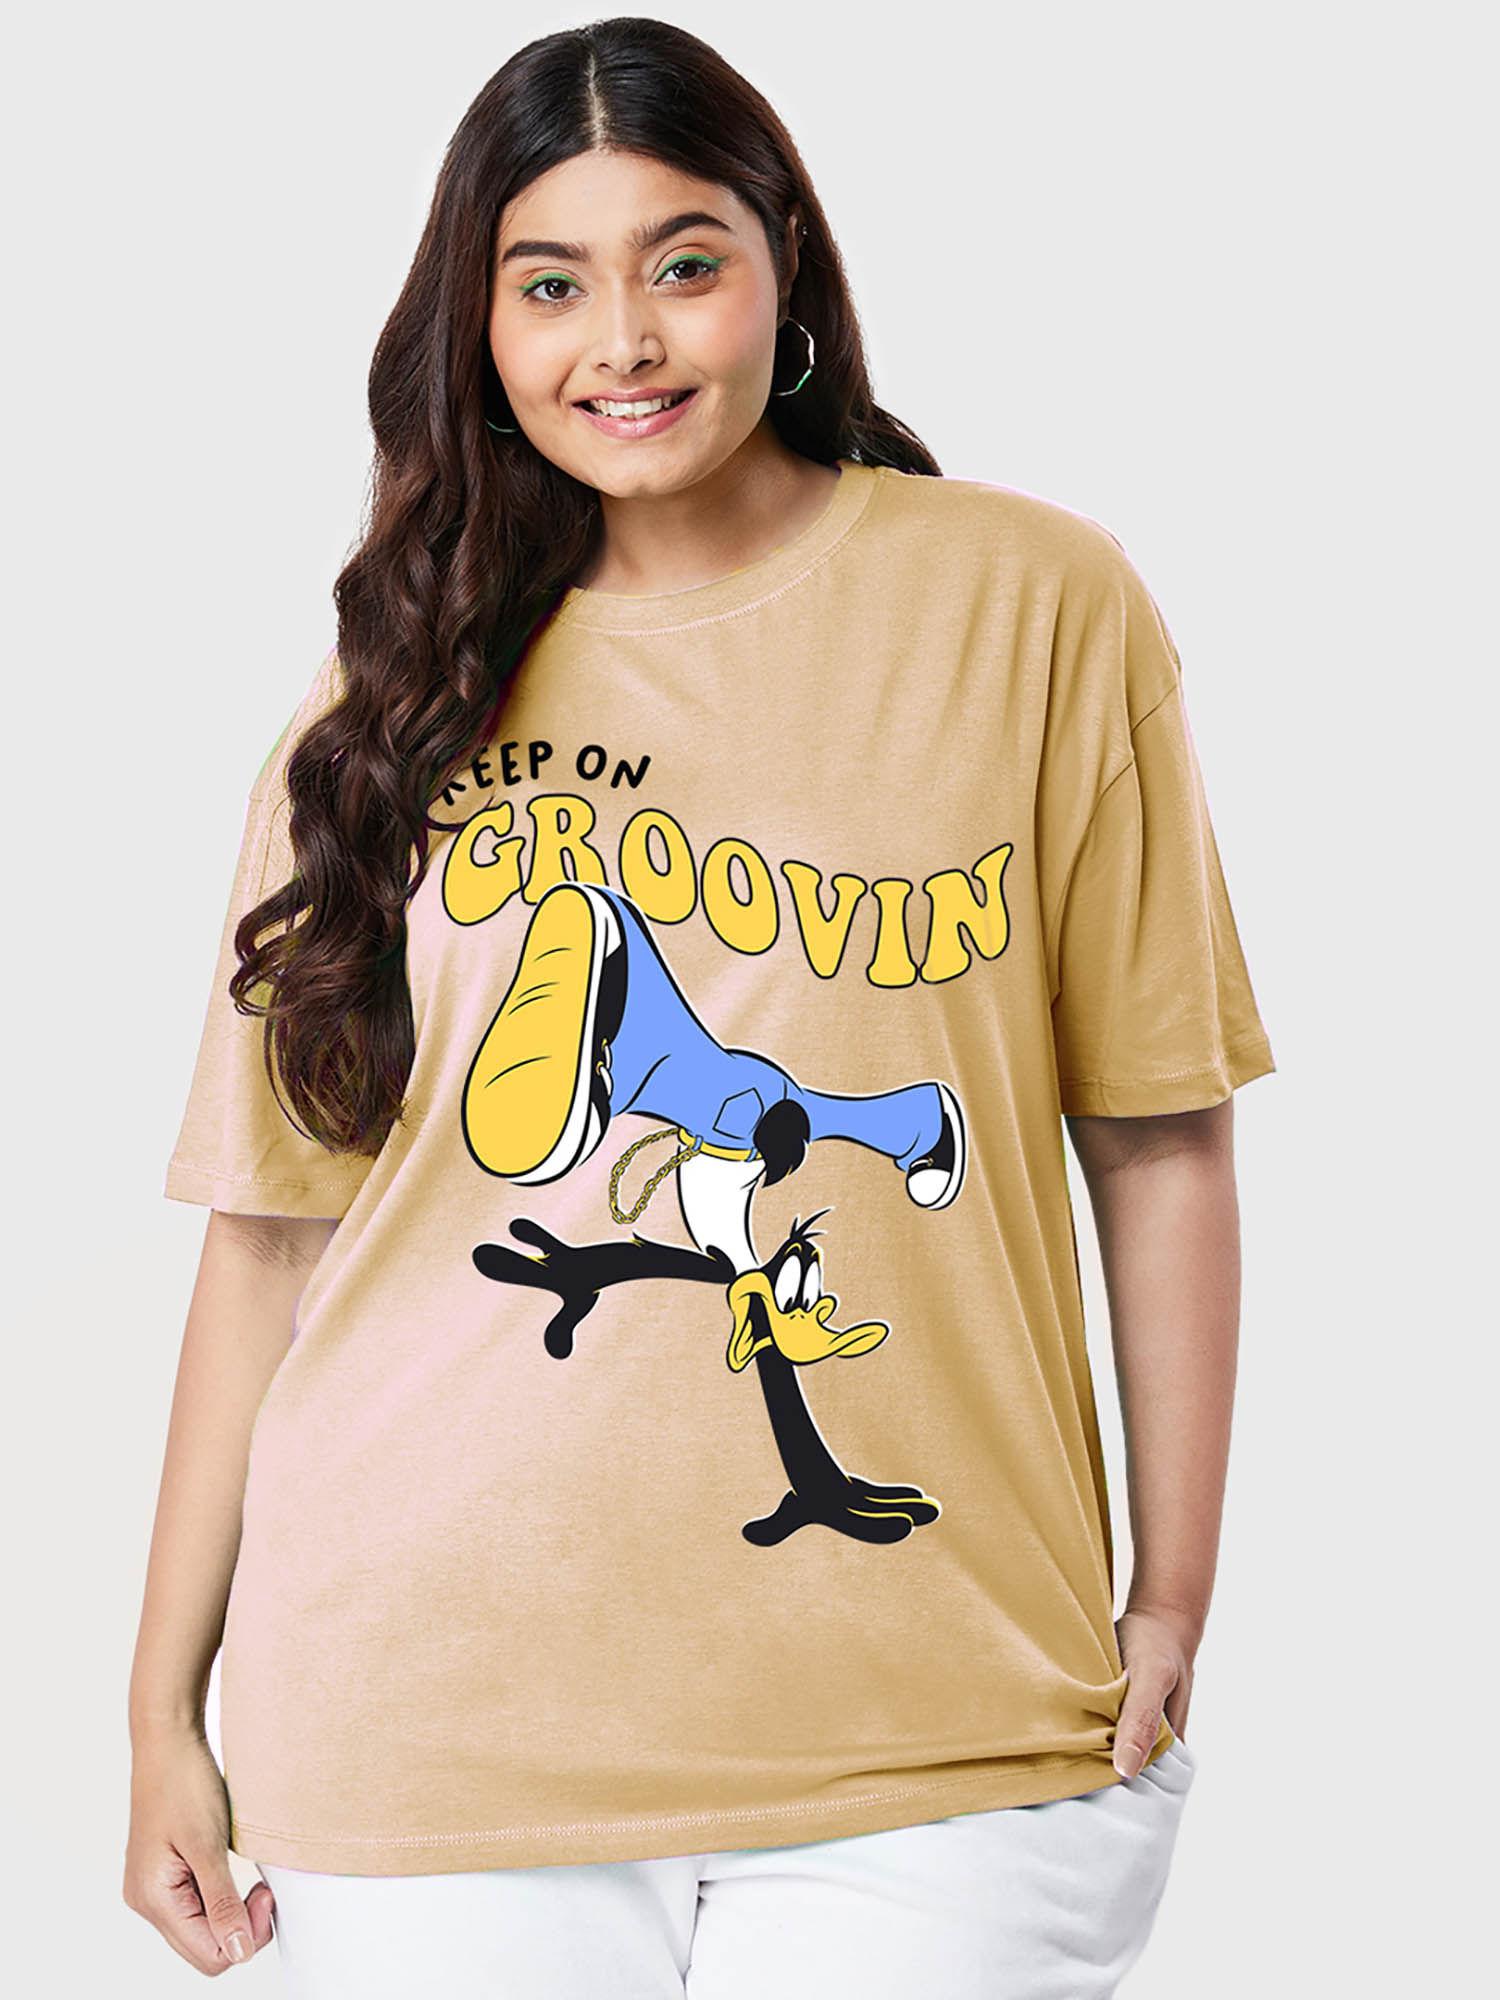 x official looney tunes merchandise womens brown graphic oversized plus size t-shirt